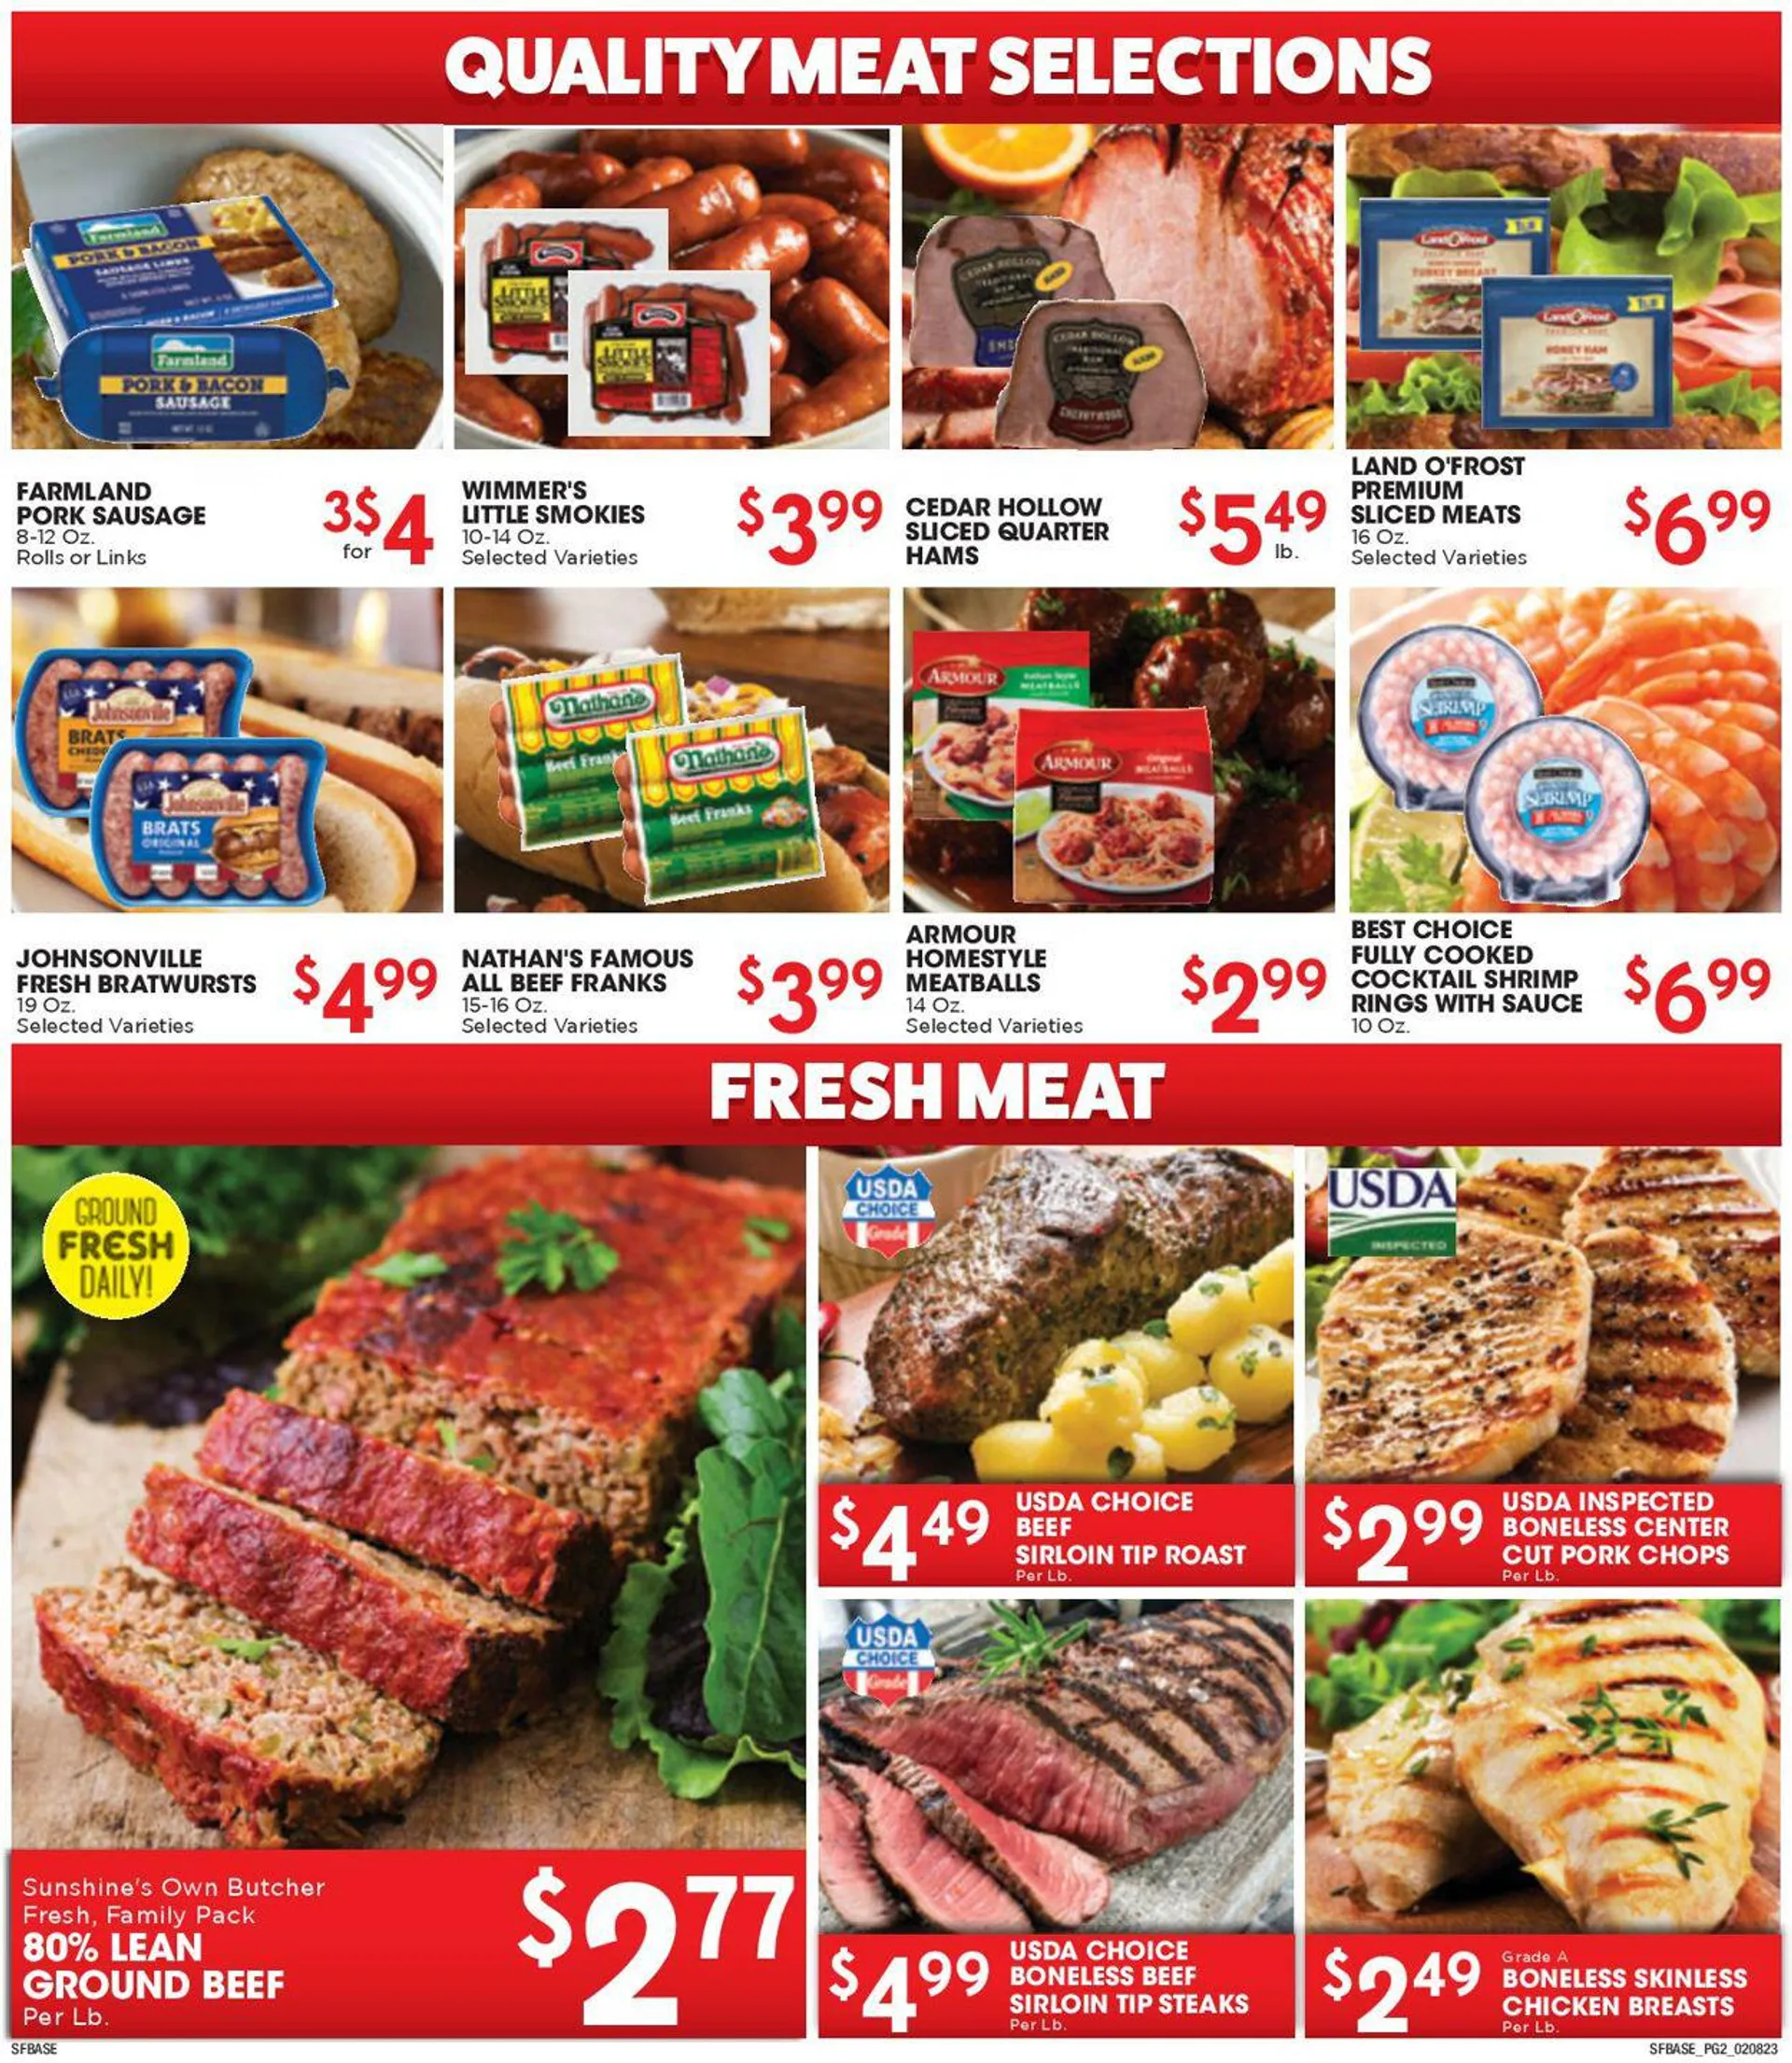 Sunshine Foods Current weekly ad - 2